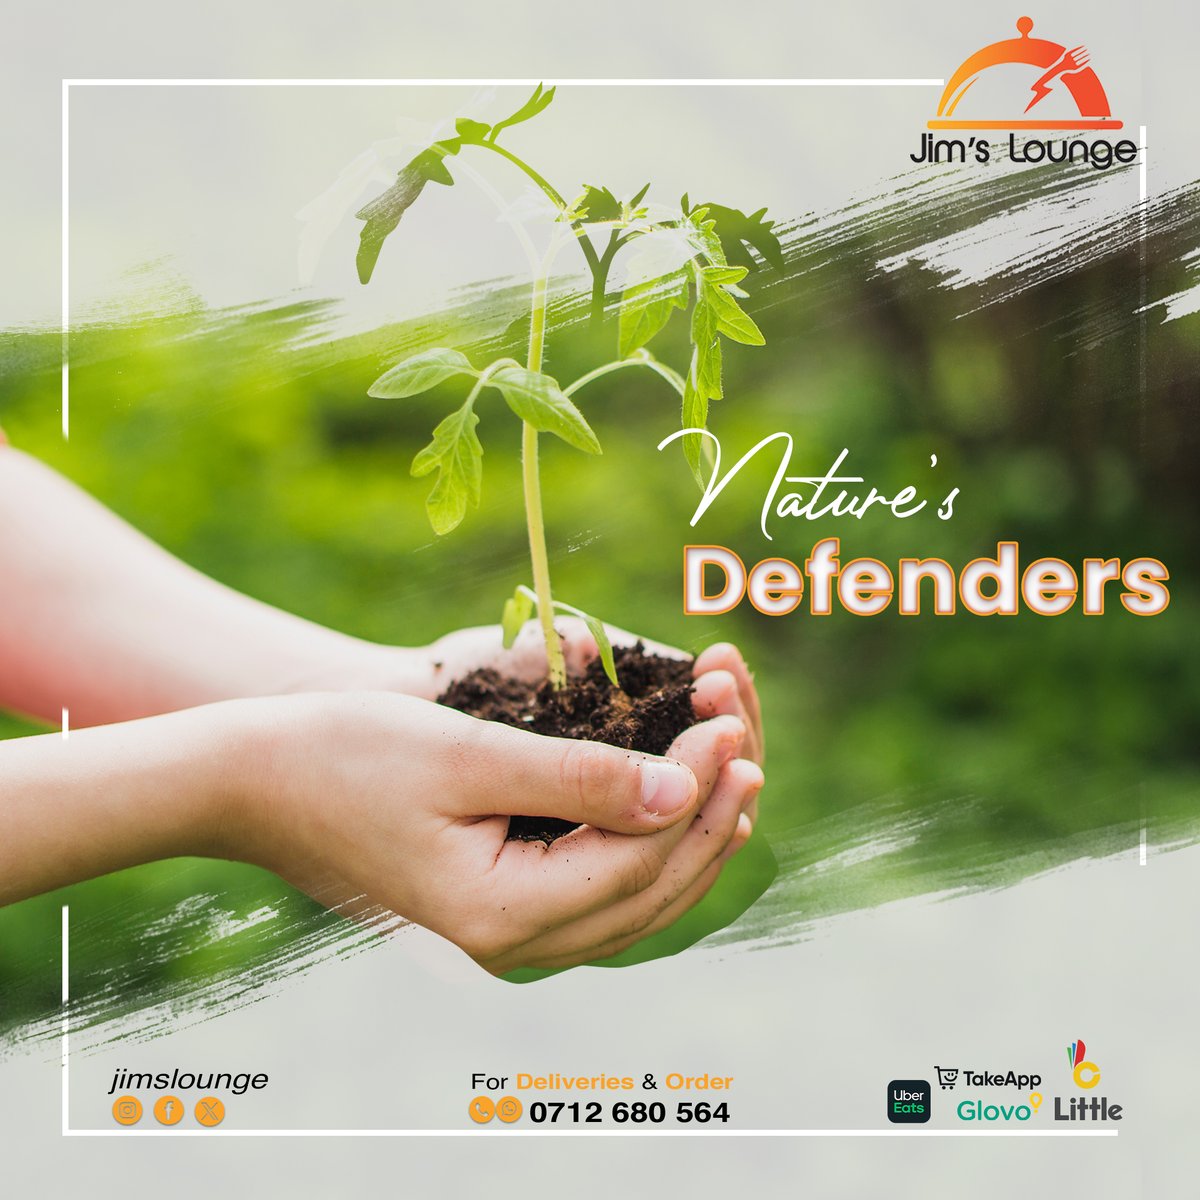 Be Nature's defender by #plantingtrees.
#nationaltreeplantingday #climatechange #planttrees
@jimsloungeG